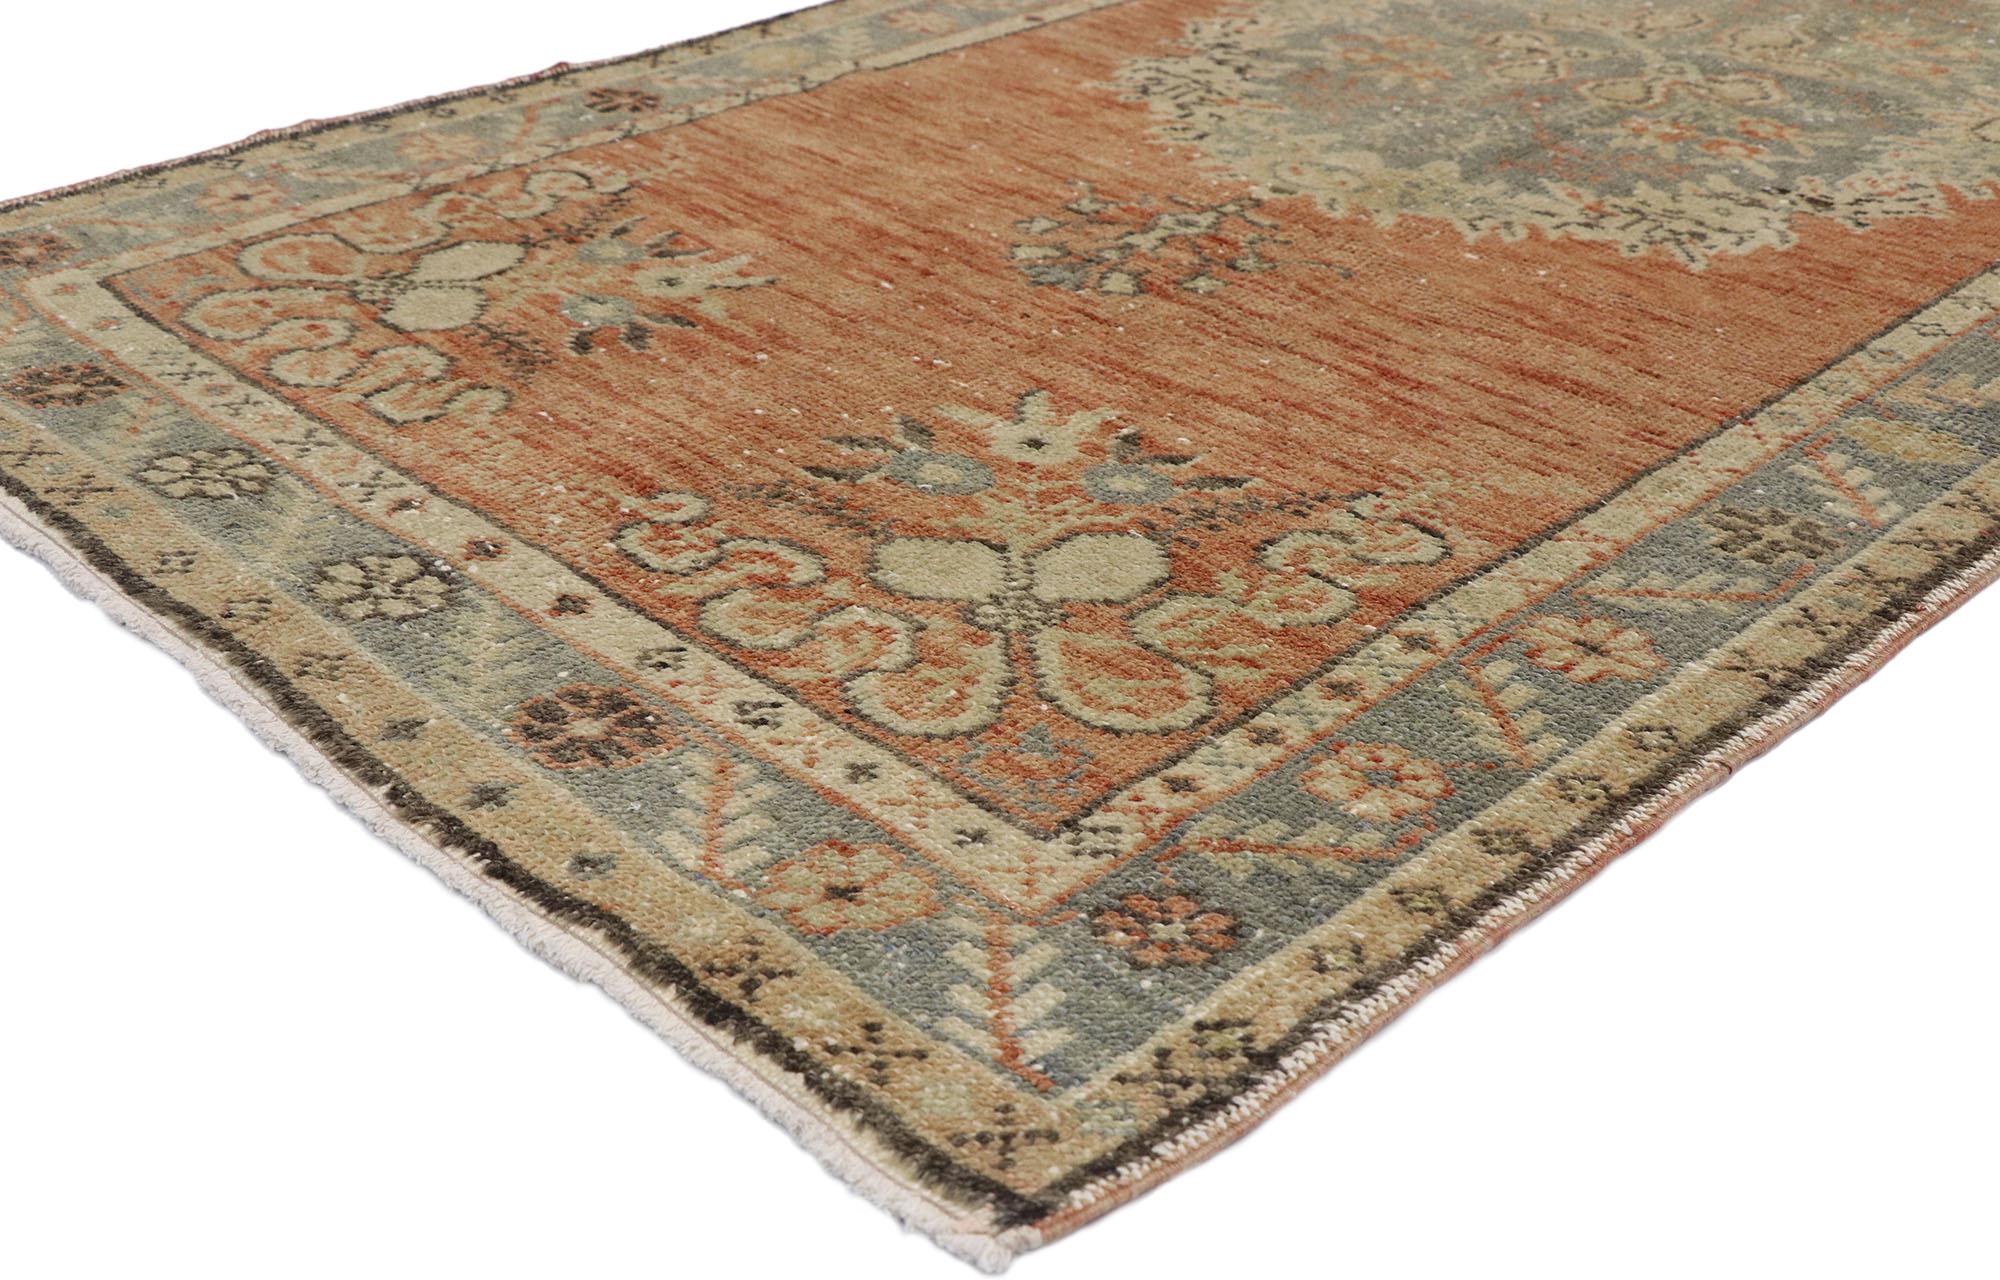 52745, distressed vintage Turkish Oushak runner with Romantic French Country style. French Country and Romantic Rusticity meets timeless Anatolian tradition in this hand knotted wool distressed vintage Turkish Oushak runner. Set with three elaborate